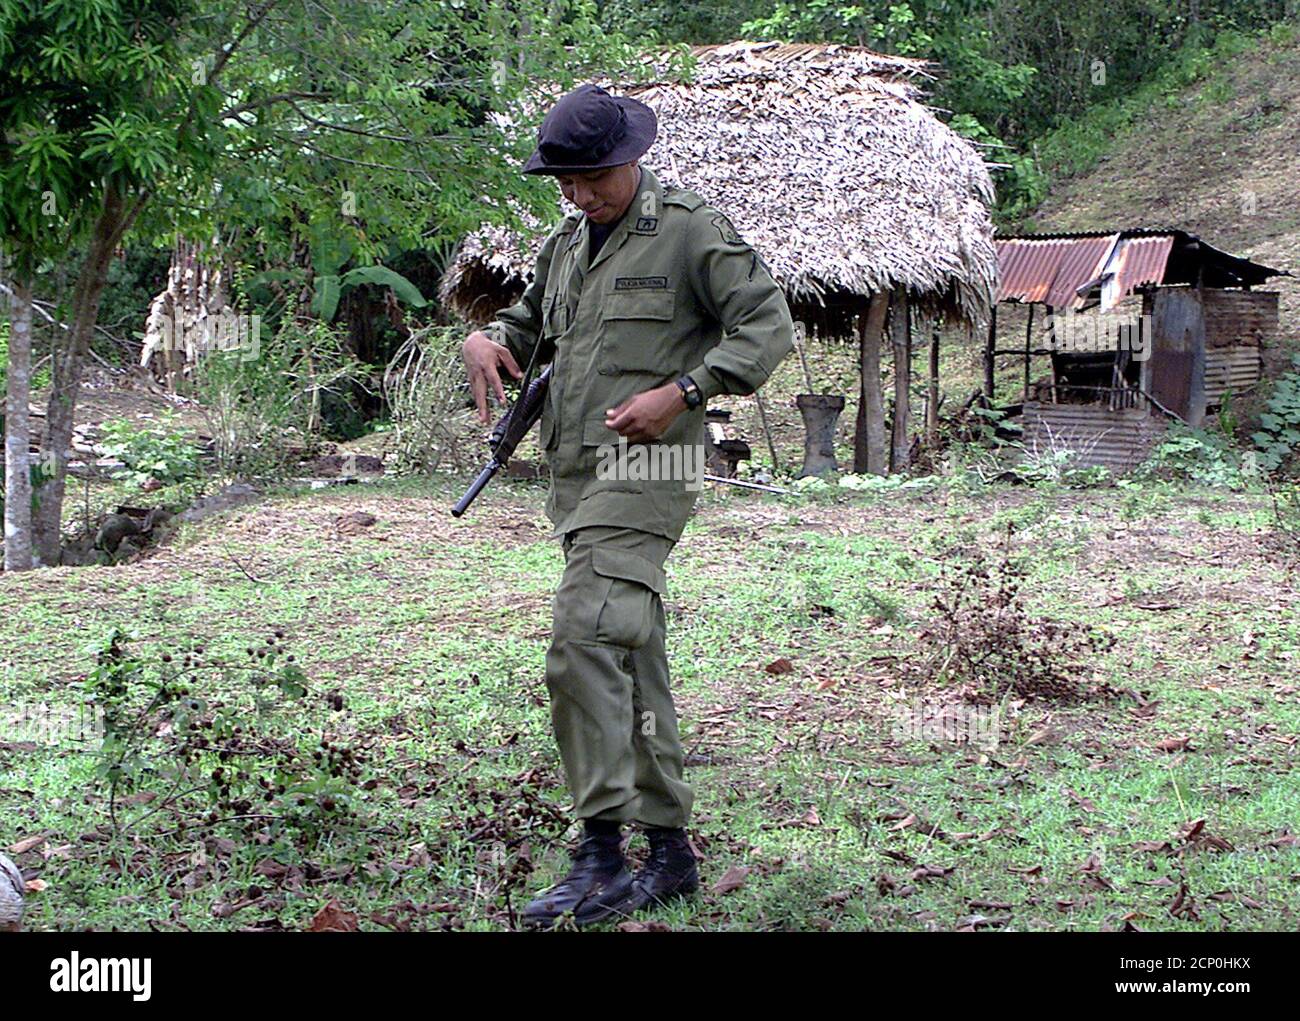 A prison guard watches over a beachside camp for detainees on Panama's penal colony Coiba Island, Panama May 9, 2002. Inspired by French Guiana's notoriously brutal Devil's Island, Coiba became a death camp for political prisoners under the 1980s dictator Manual Noriega. The penal colony, founded in 1919, is due to be shut down over the next two years and plans are underway to tap the island's new status as a national park. REUTERS/Alberto Lowe. TO MATCH FEATURE PANAMA-PRISON-WILDLIFE  AL/SV Stock Photo